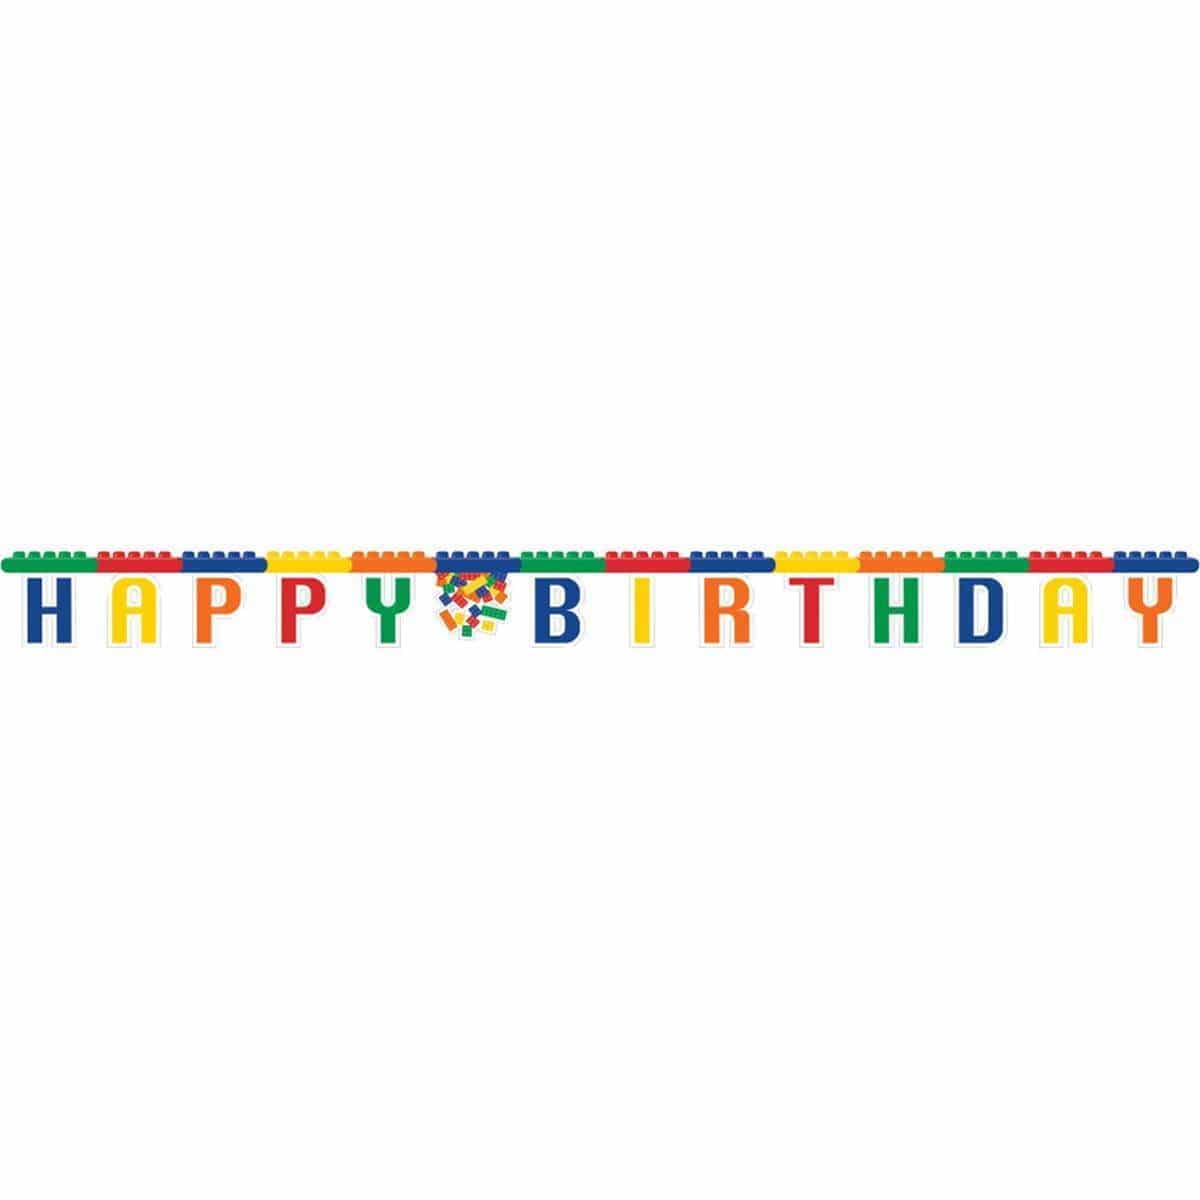 Buy Kids Birthday Block Party jointed banner sold at Party Expert